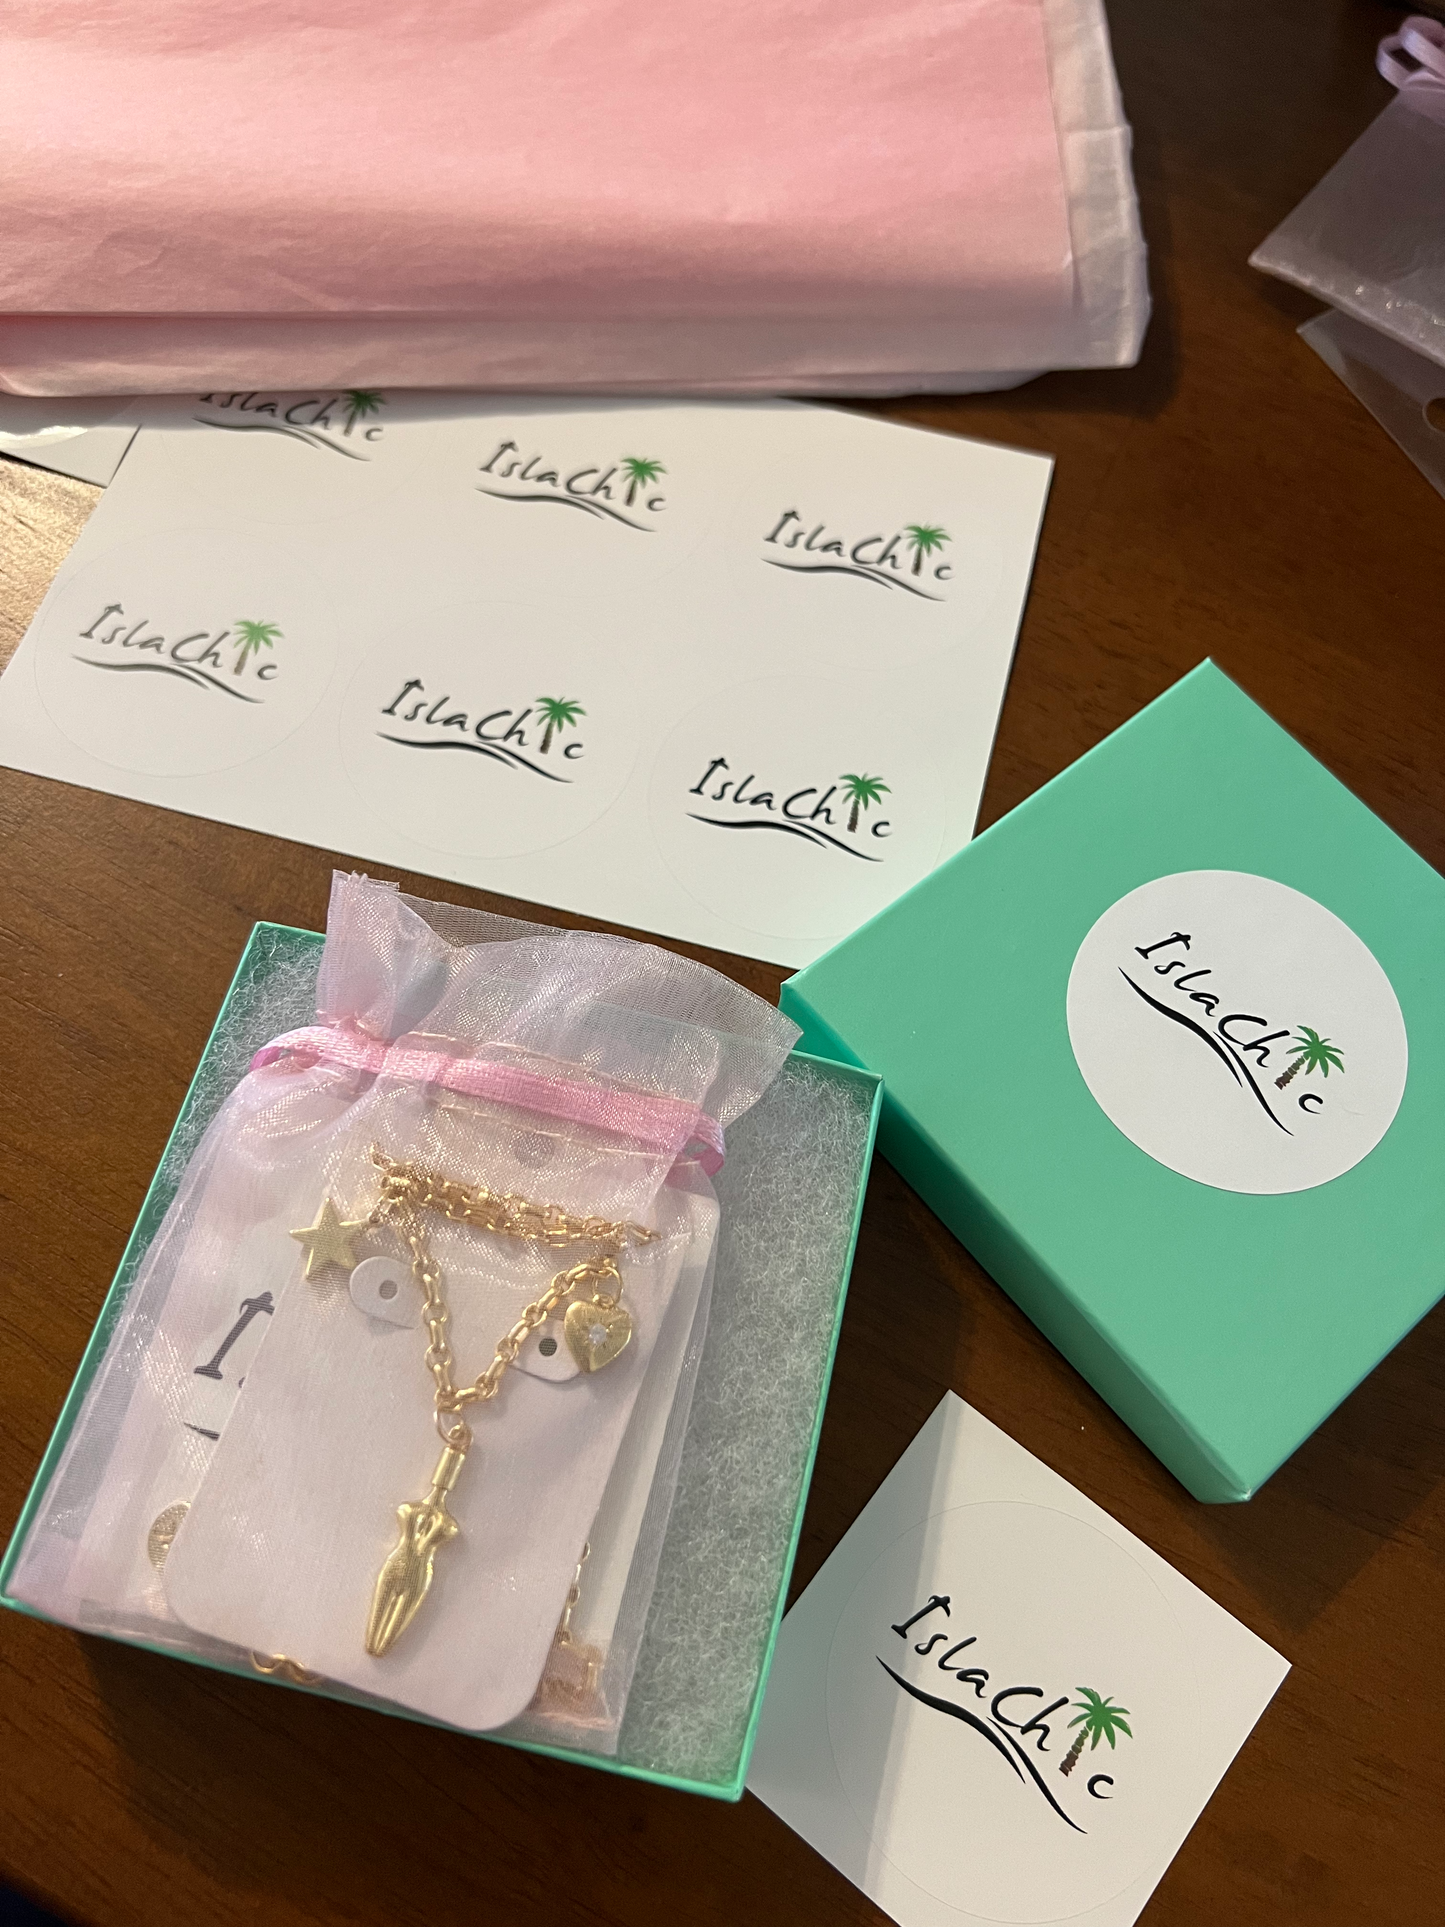 A bird eye view image of our islachic jewelry box/packaging with a 3 charm gold-filled necklace. A teal colored square jewelry box with a circular white sticker with our IslaChic logo. Sitting inside the jewelry box is a pink mesh pouch with our 3 charm gold-filled necklace. Light pink tissue paper and sheet of Islachic logo stickers. 